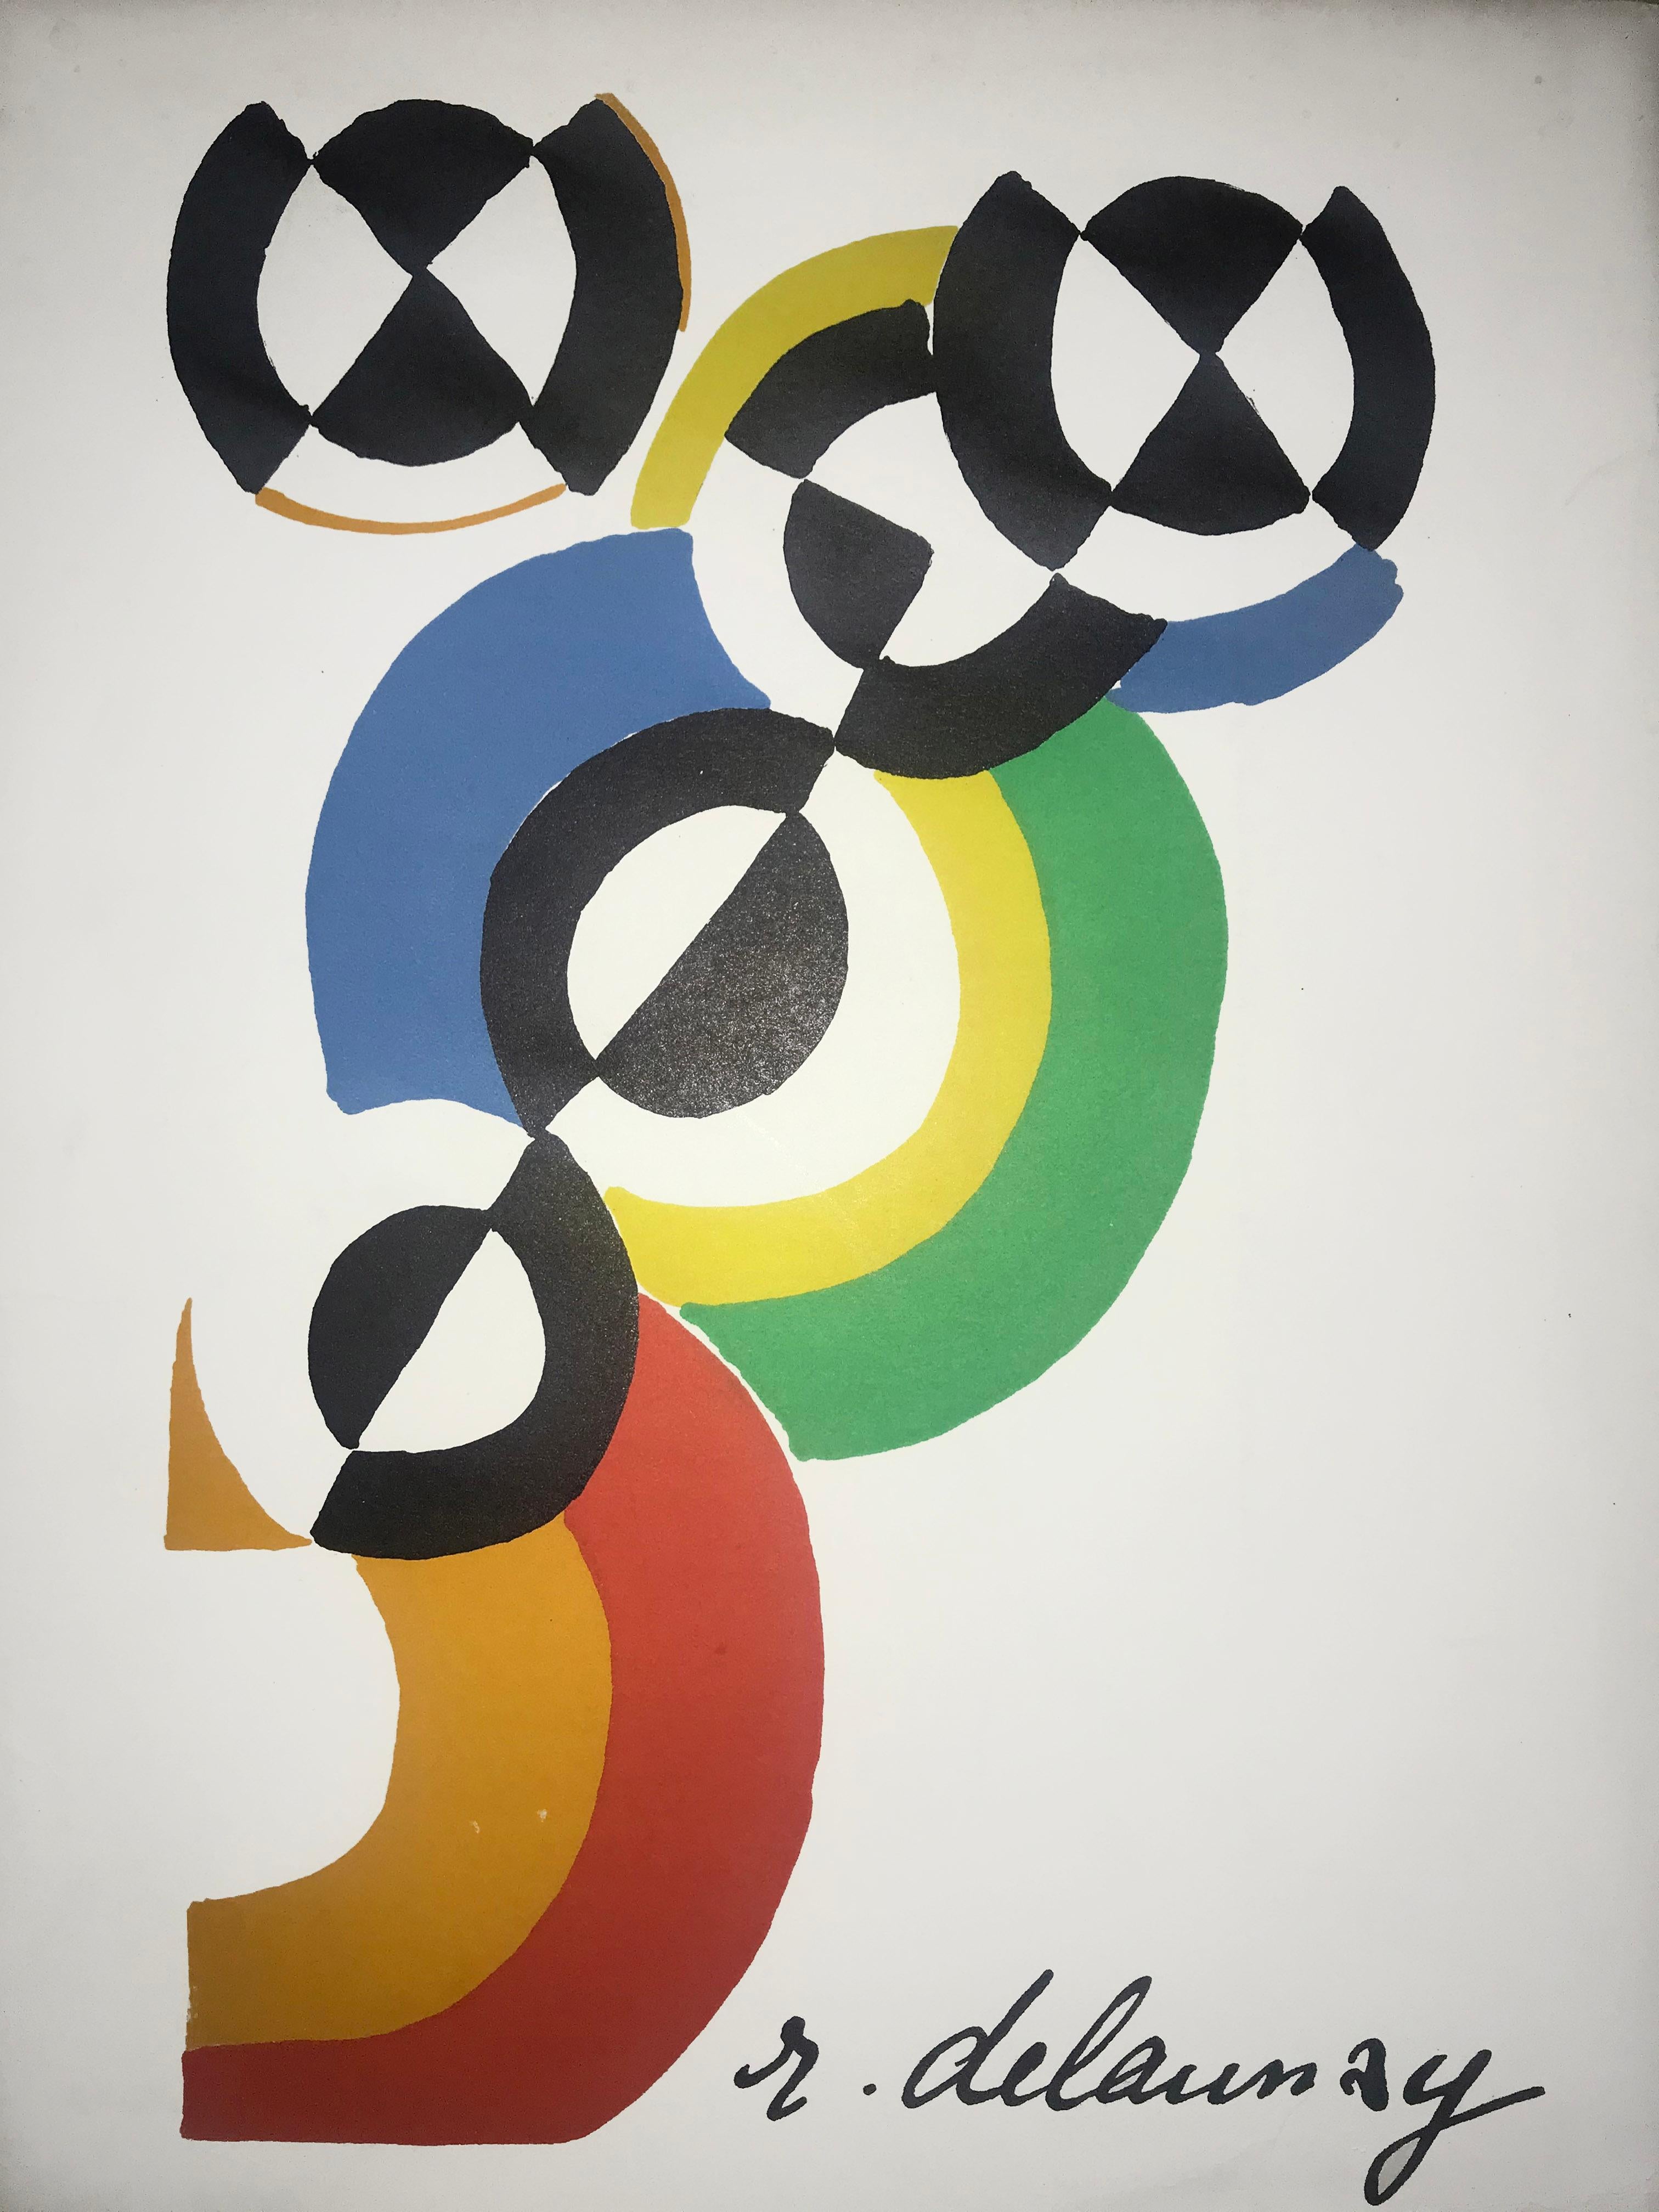 Portfolio Robert Delaunay by Jacques Damase 1st Edition 1973. - Art by Robert De Launay